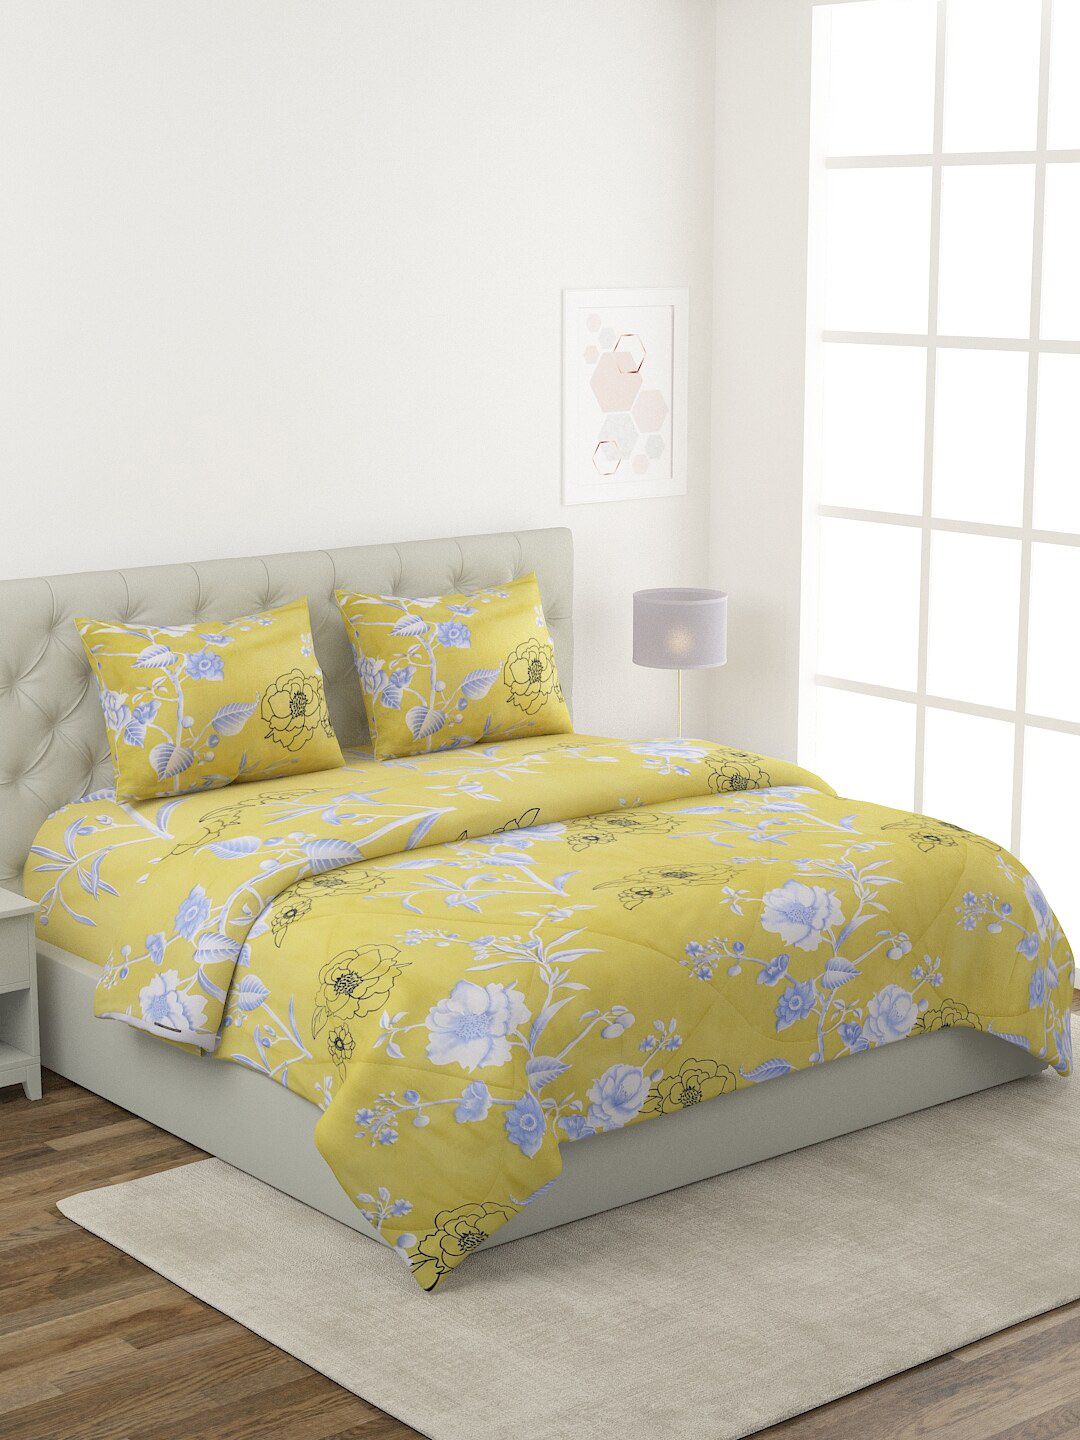 ROMEE Unisex Yellow & White Floral Printed Pure Cotton Double King Bedding Set Price in India